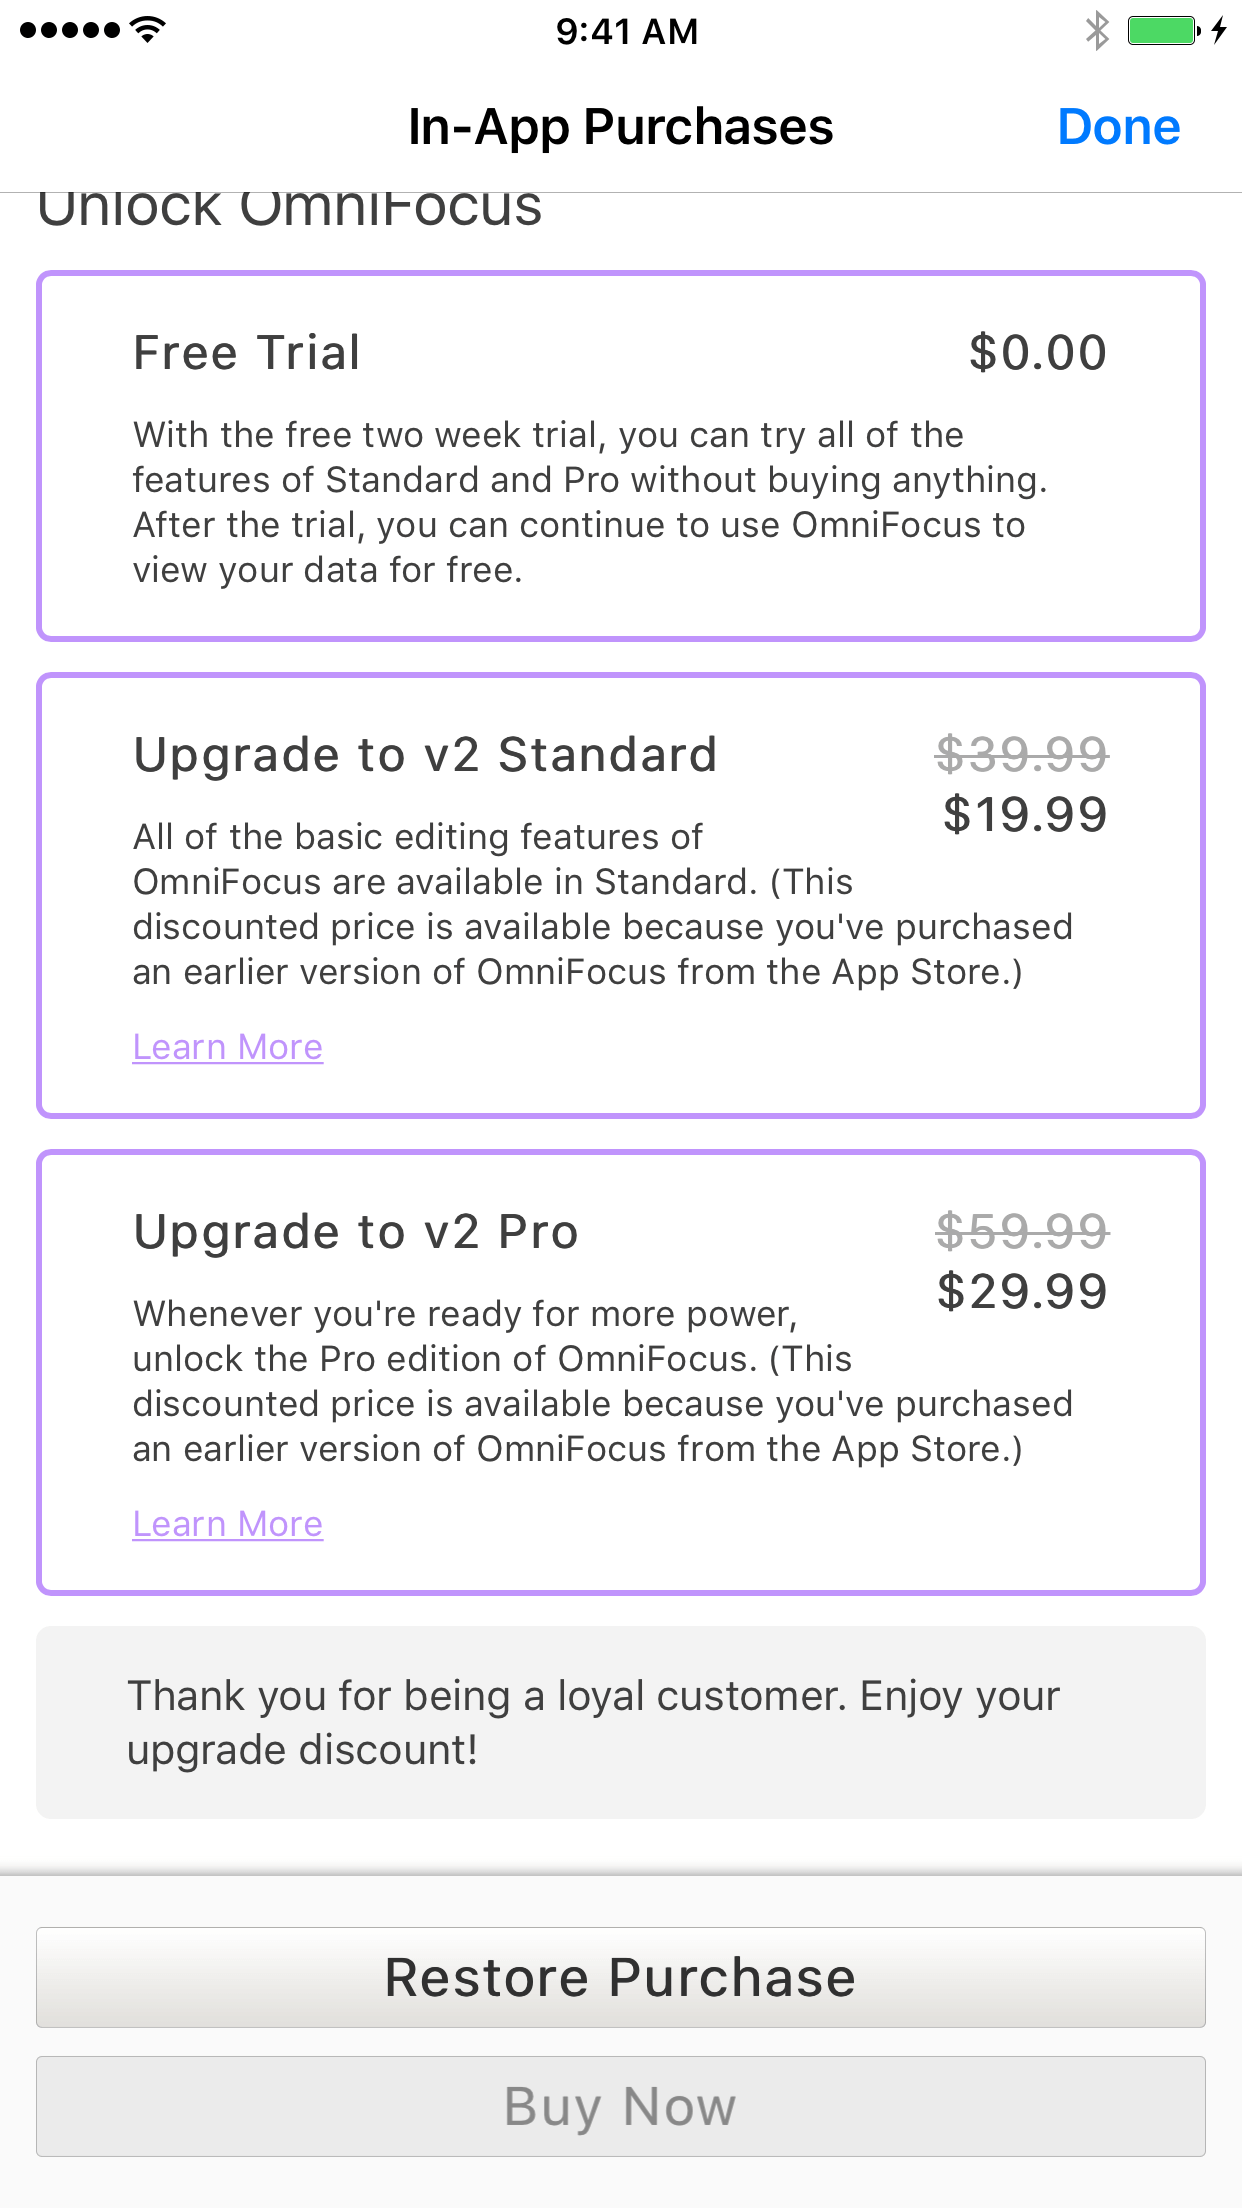 The In-App Purchase area showing discounted upgrade pricing